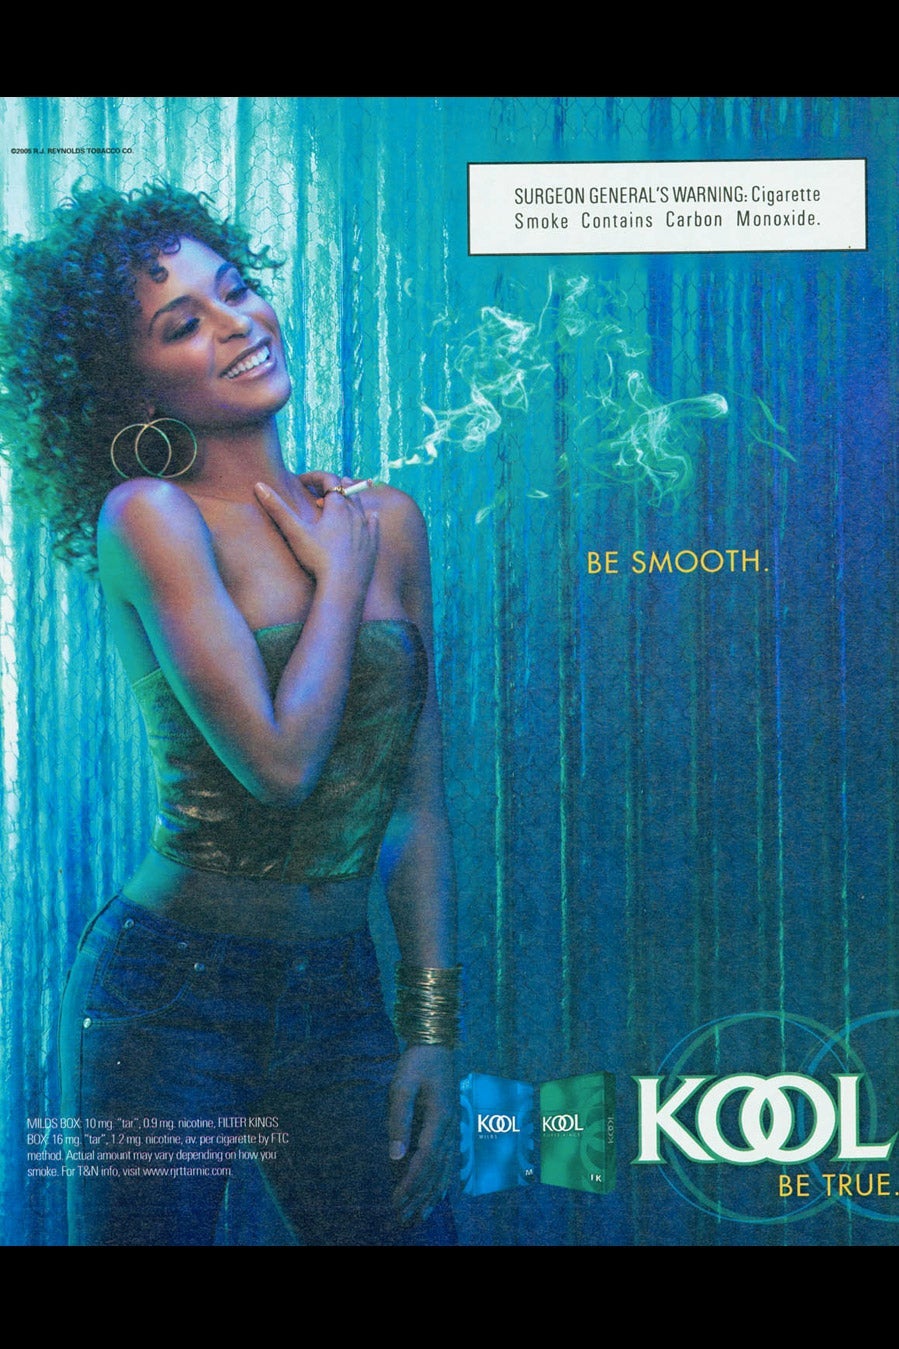 An ad depicting a curly-haired Black woman smoking a KOOL cigarette.